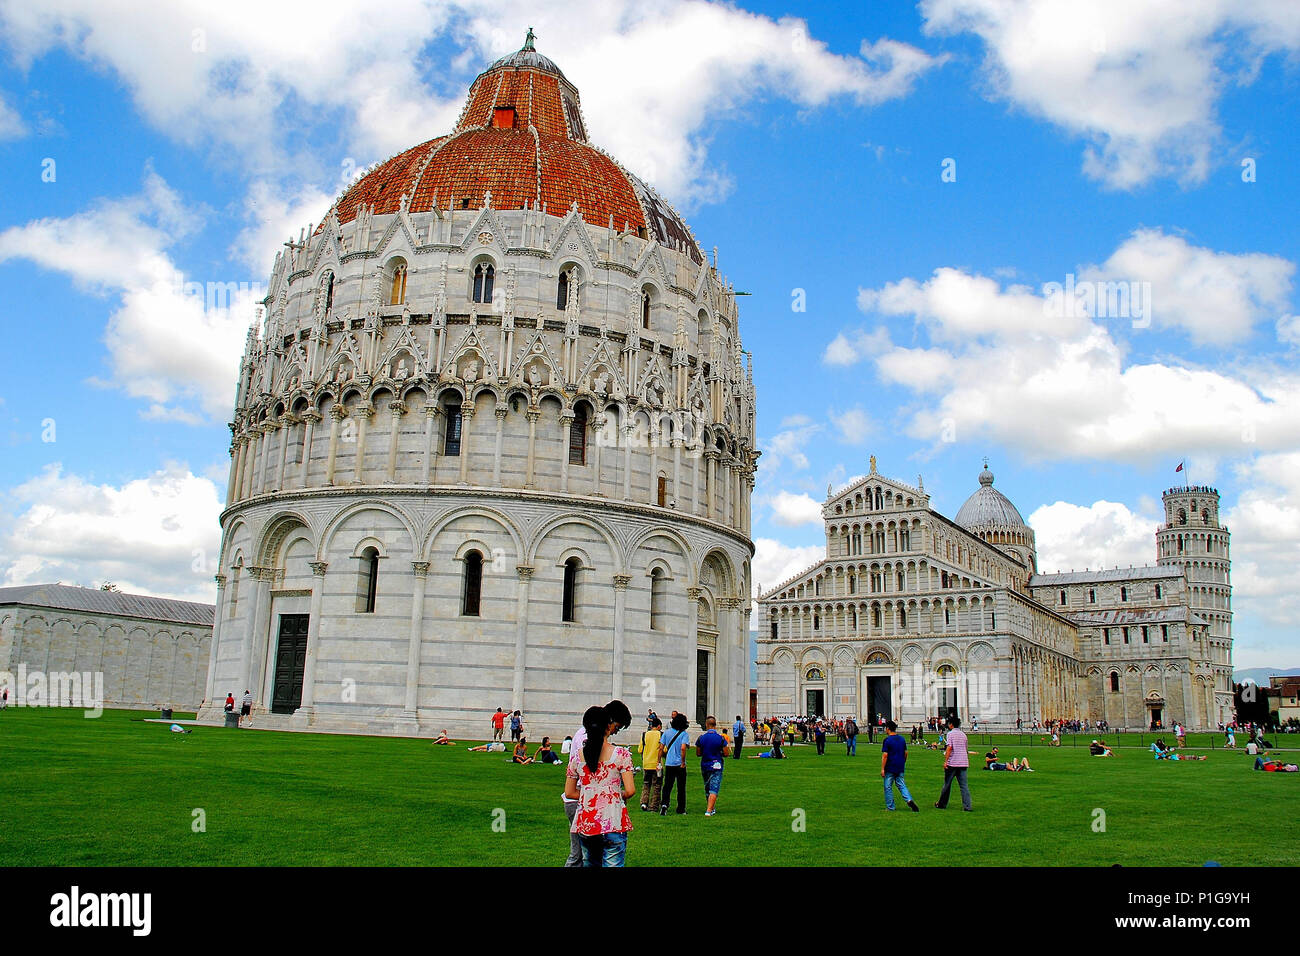 The leaning tower of Pisa complex, Pisa, Italy Stock Photo